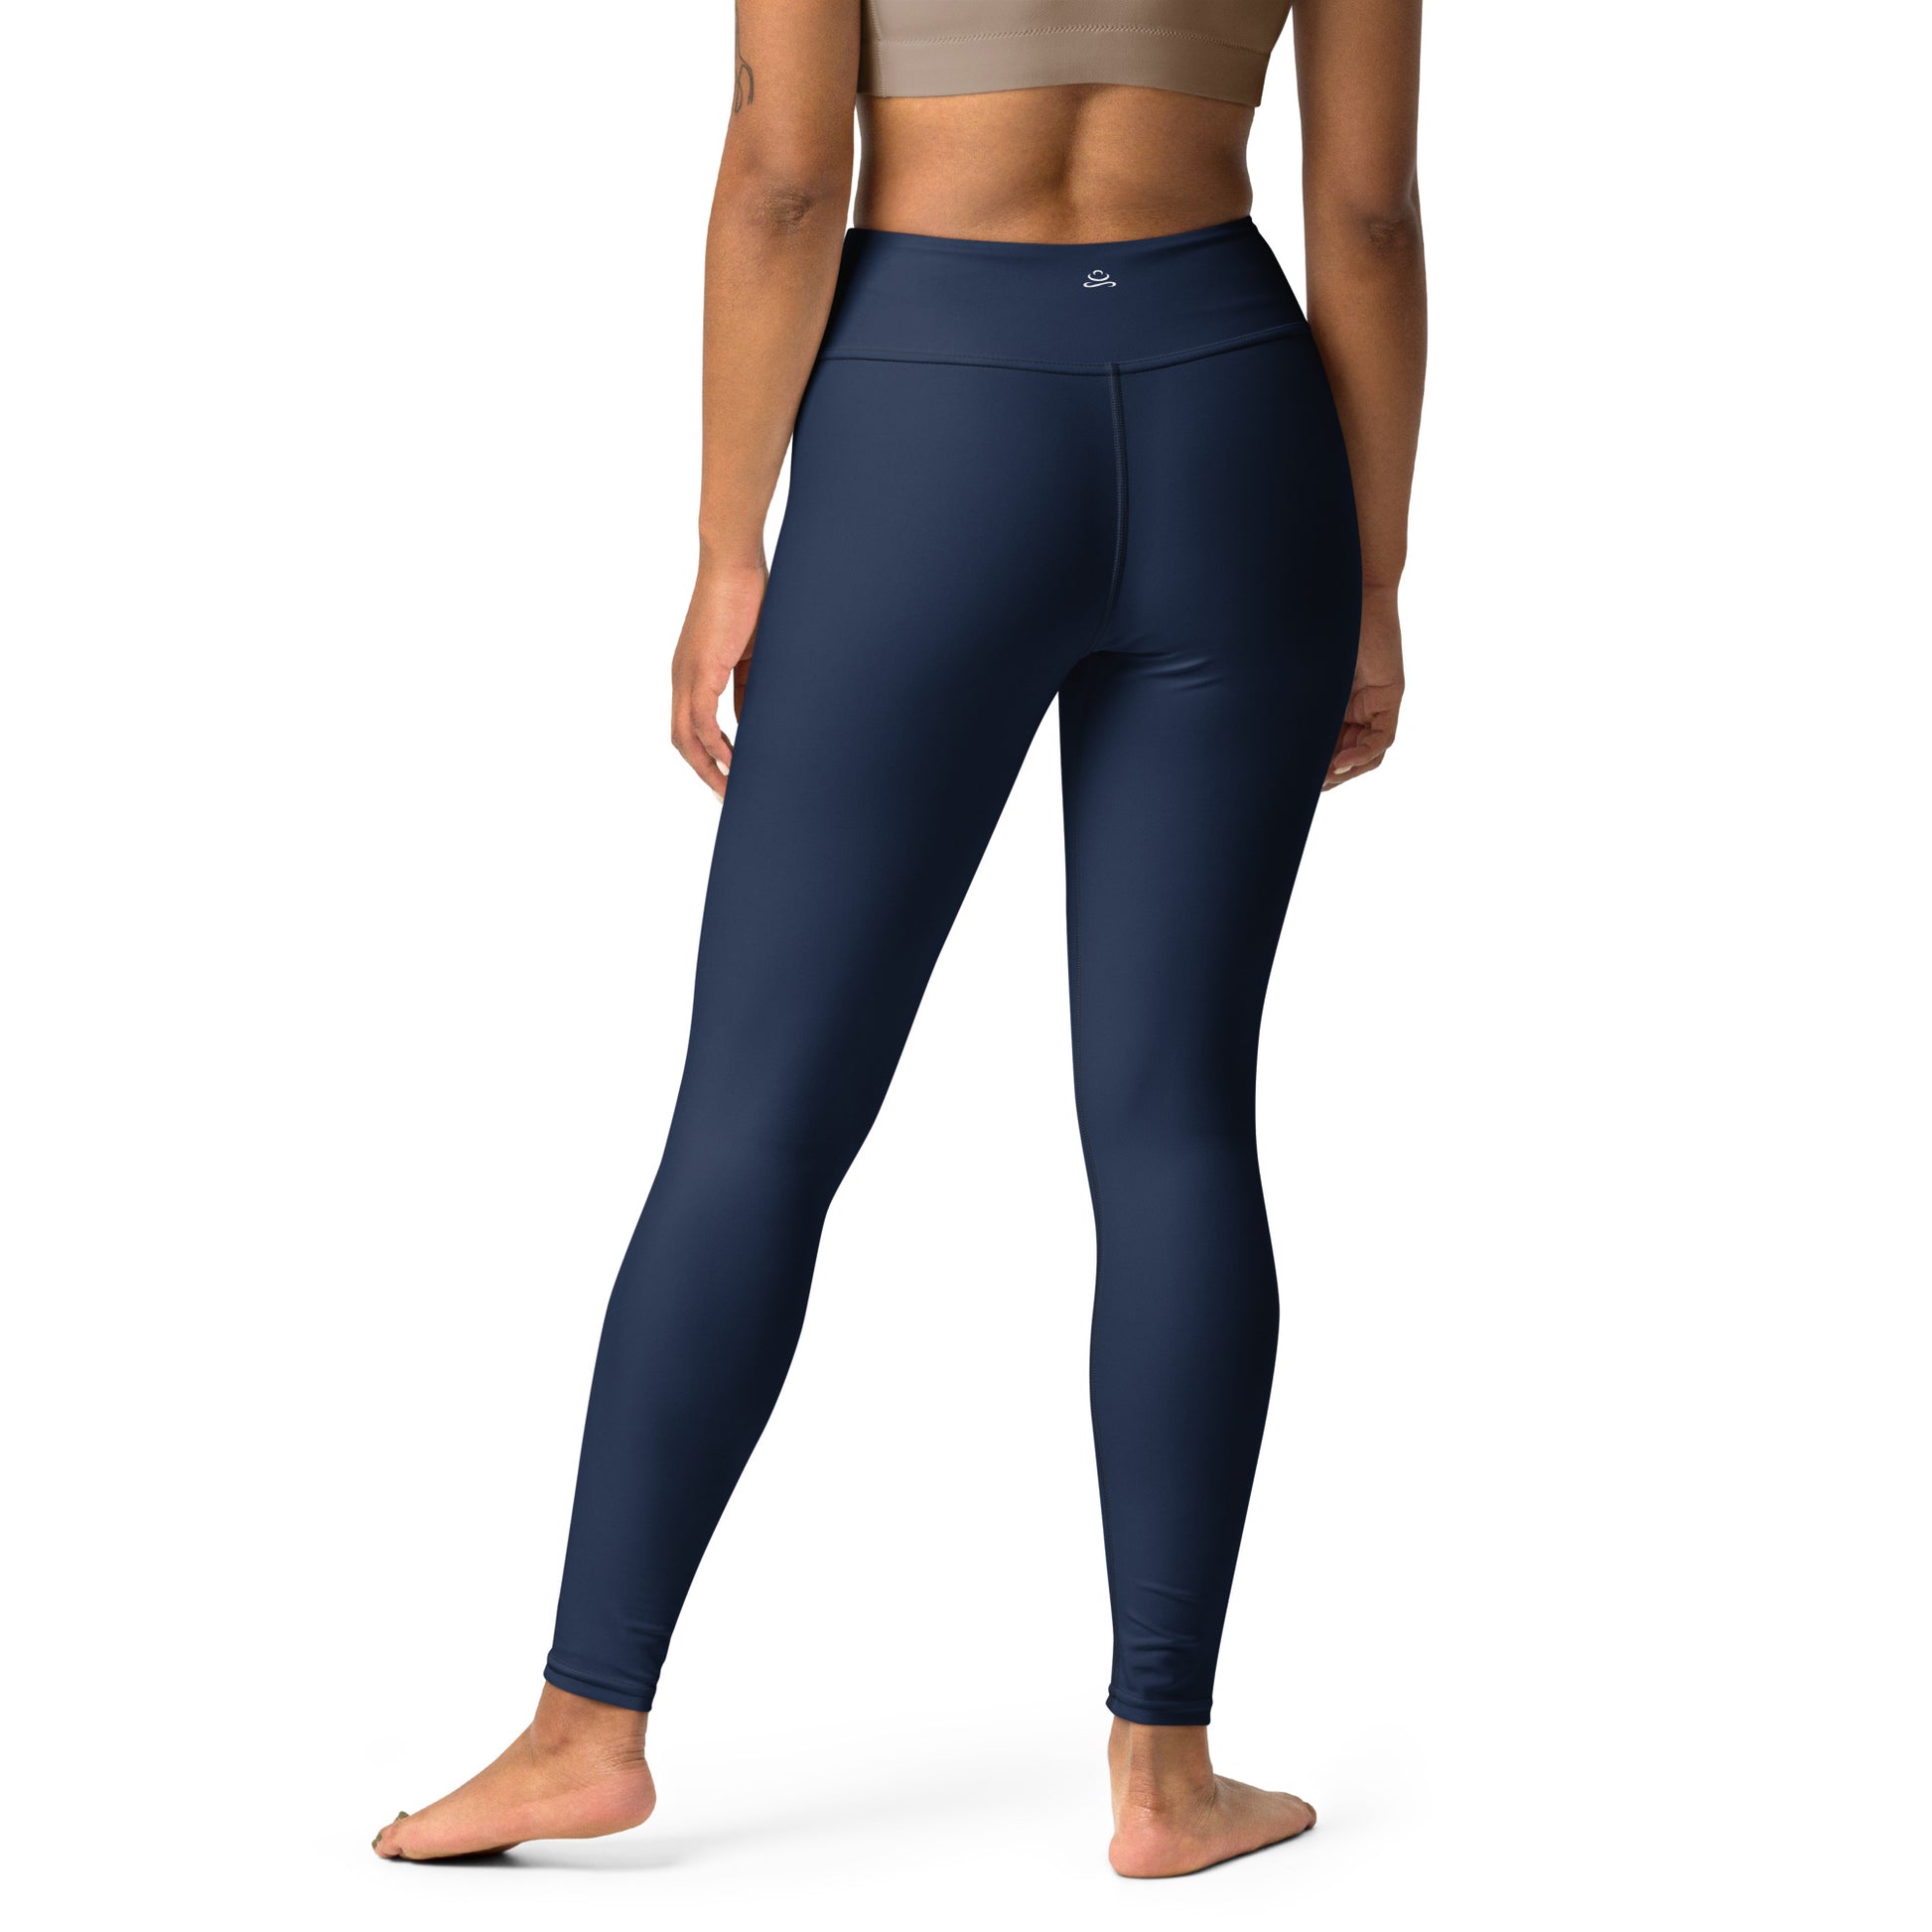 NowSunday Ultrasoft Legging with Pocket in 2023  Comfortable leggings,  High waisted leggings, 4 way stretch fabric